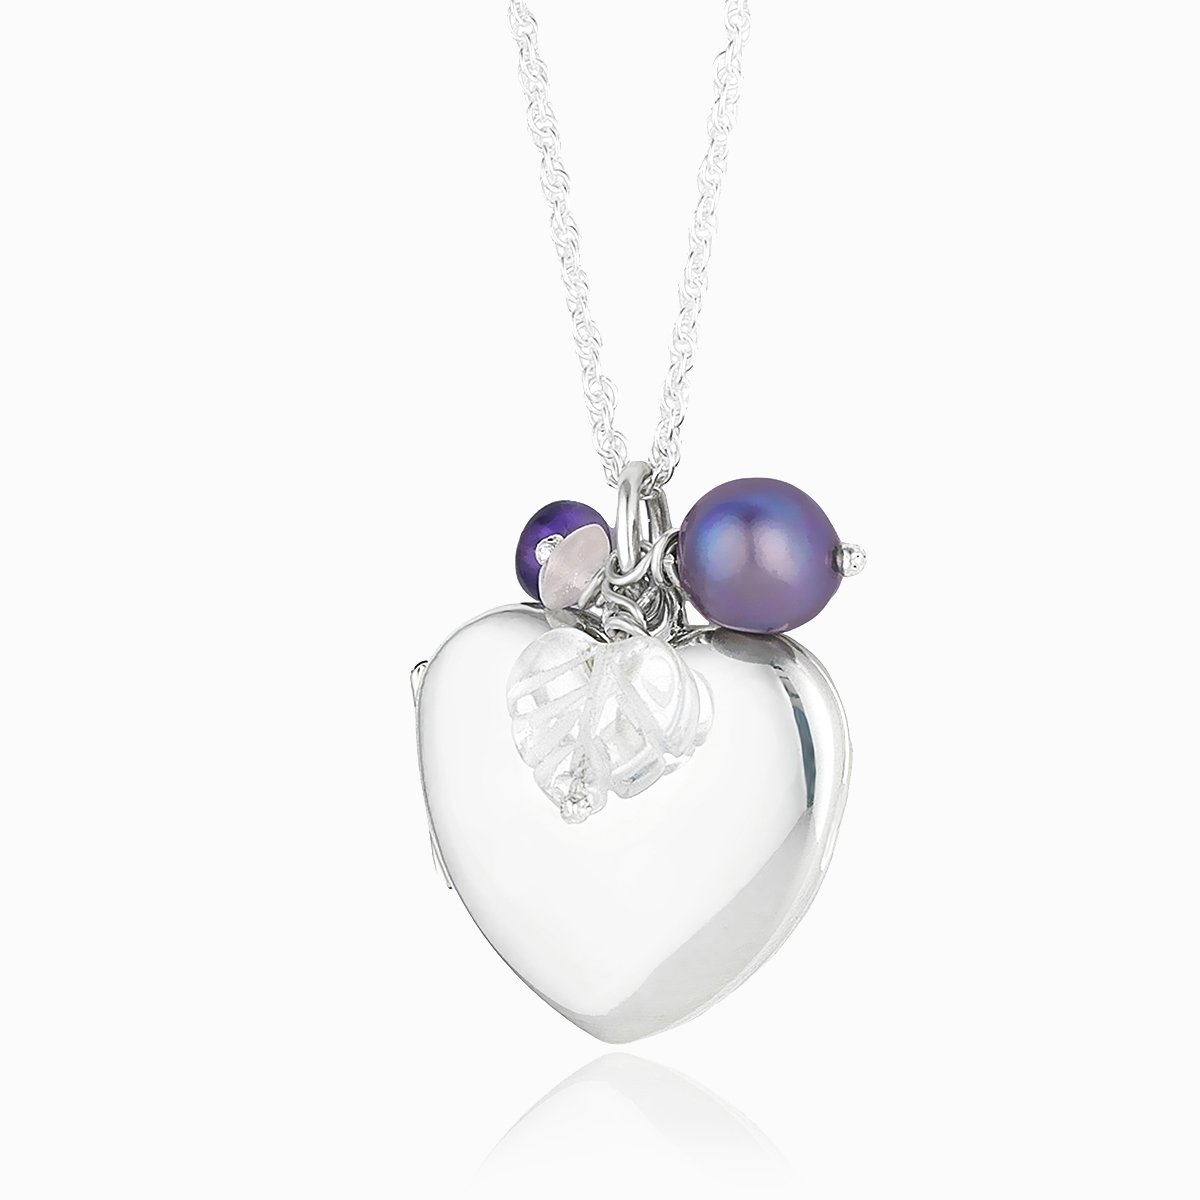 Product title: Vintage Pearl and Amethyst Locket, product type: Locket